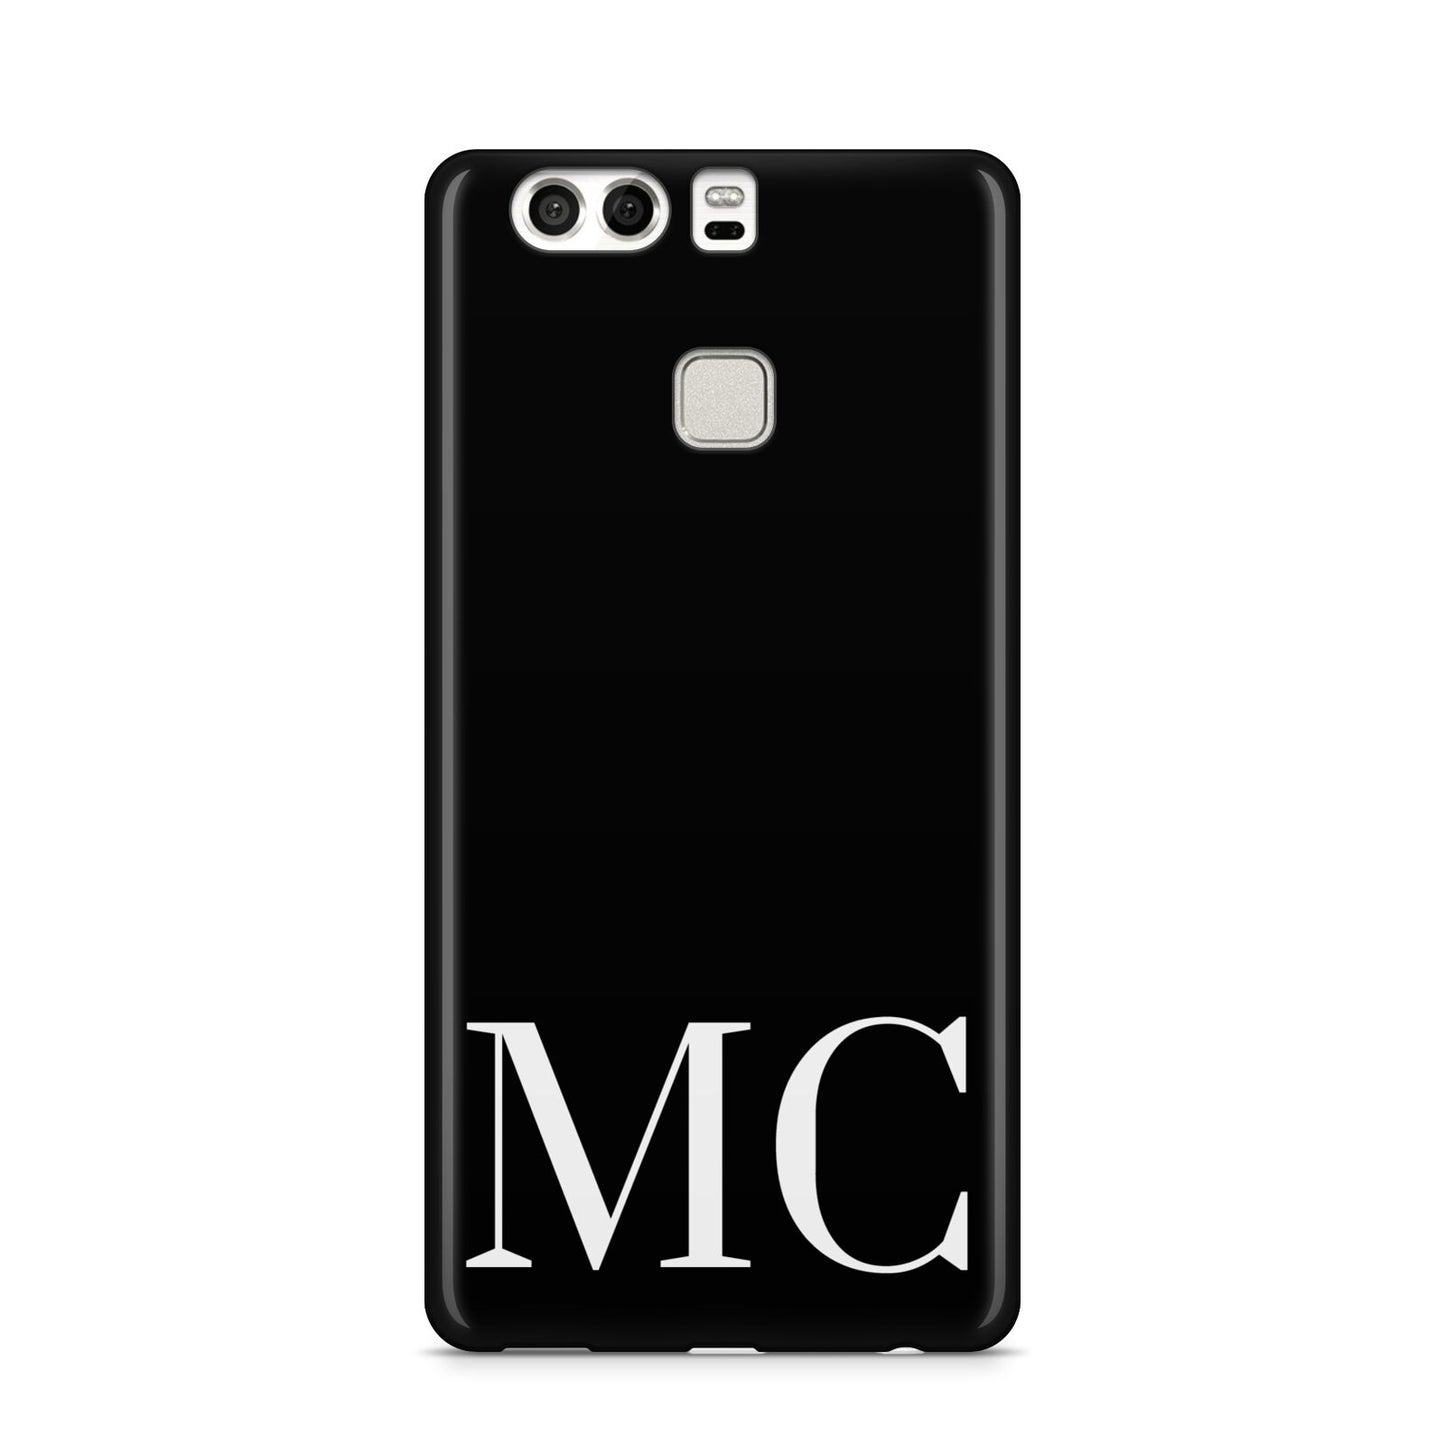 Initials Personalised 1 Huawei P9 Case